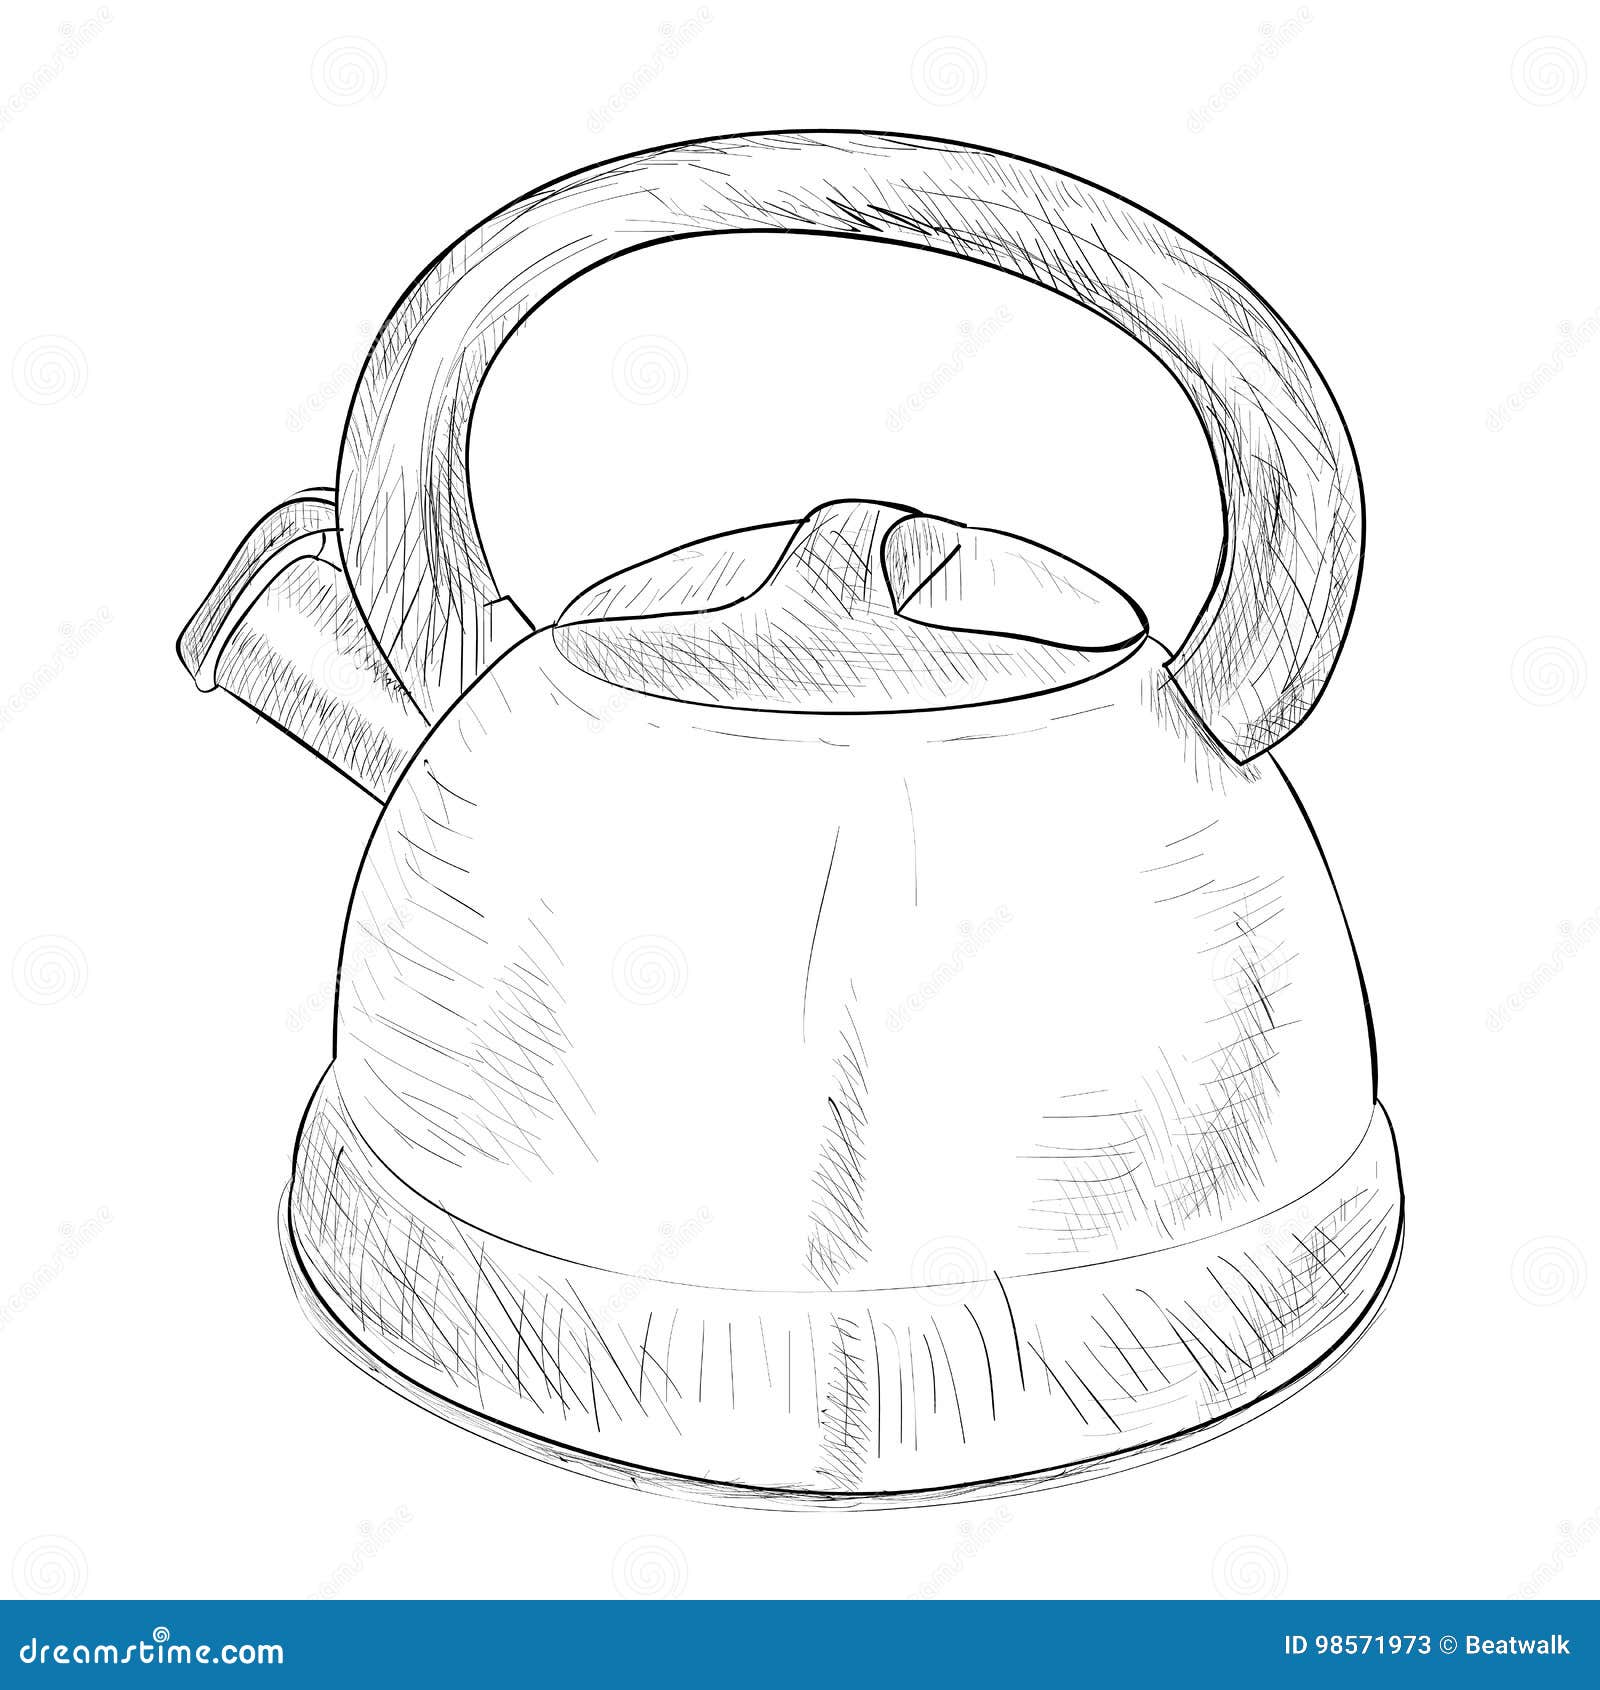 Sketch of electric kettle on a white background  Stock Illustration  59857977  PIXTA